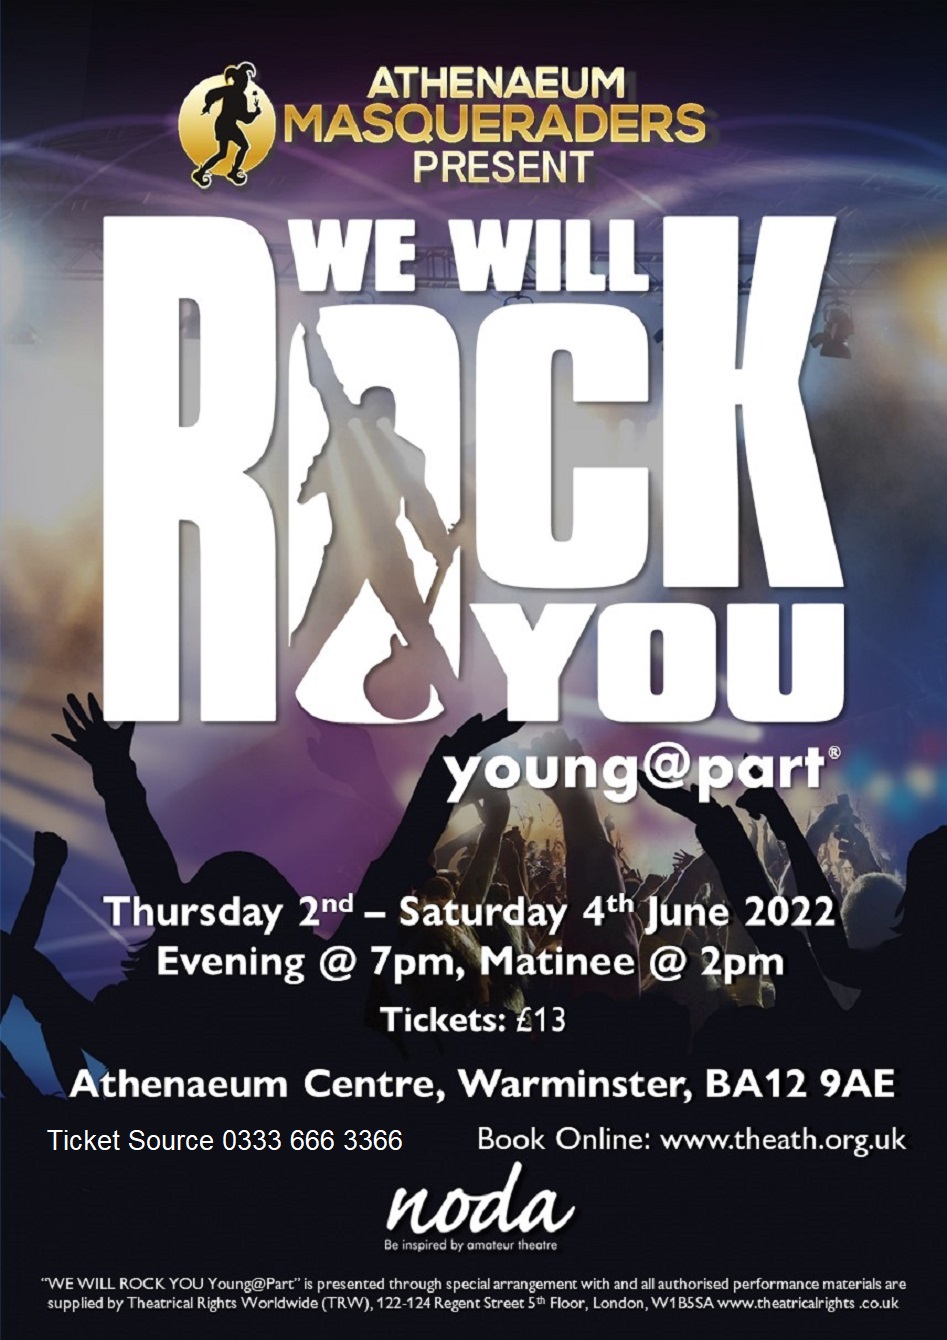 We Will Rock You Young@Part!